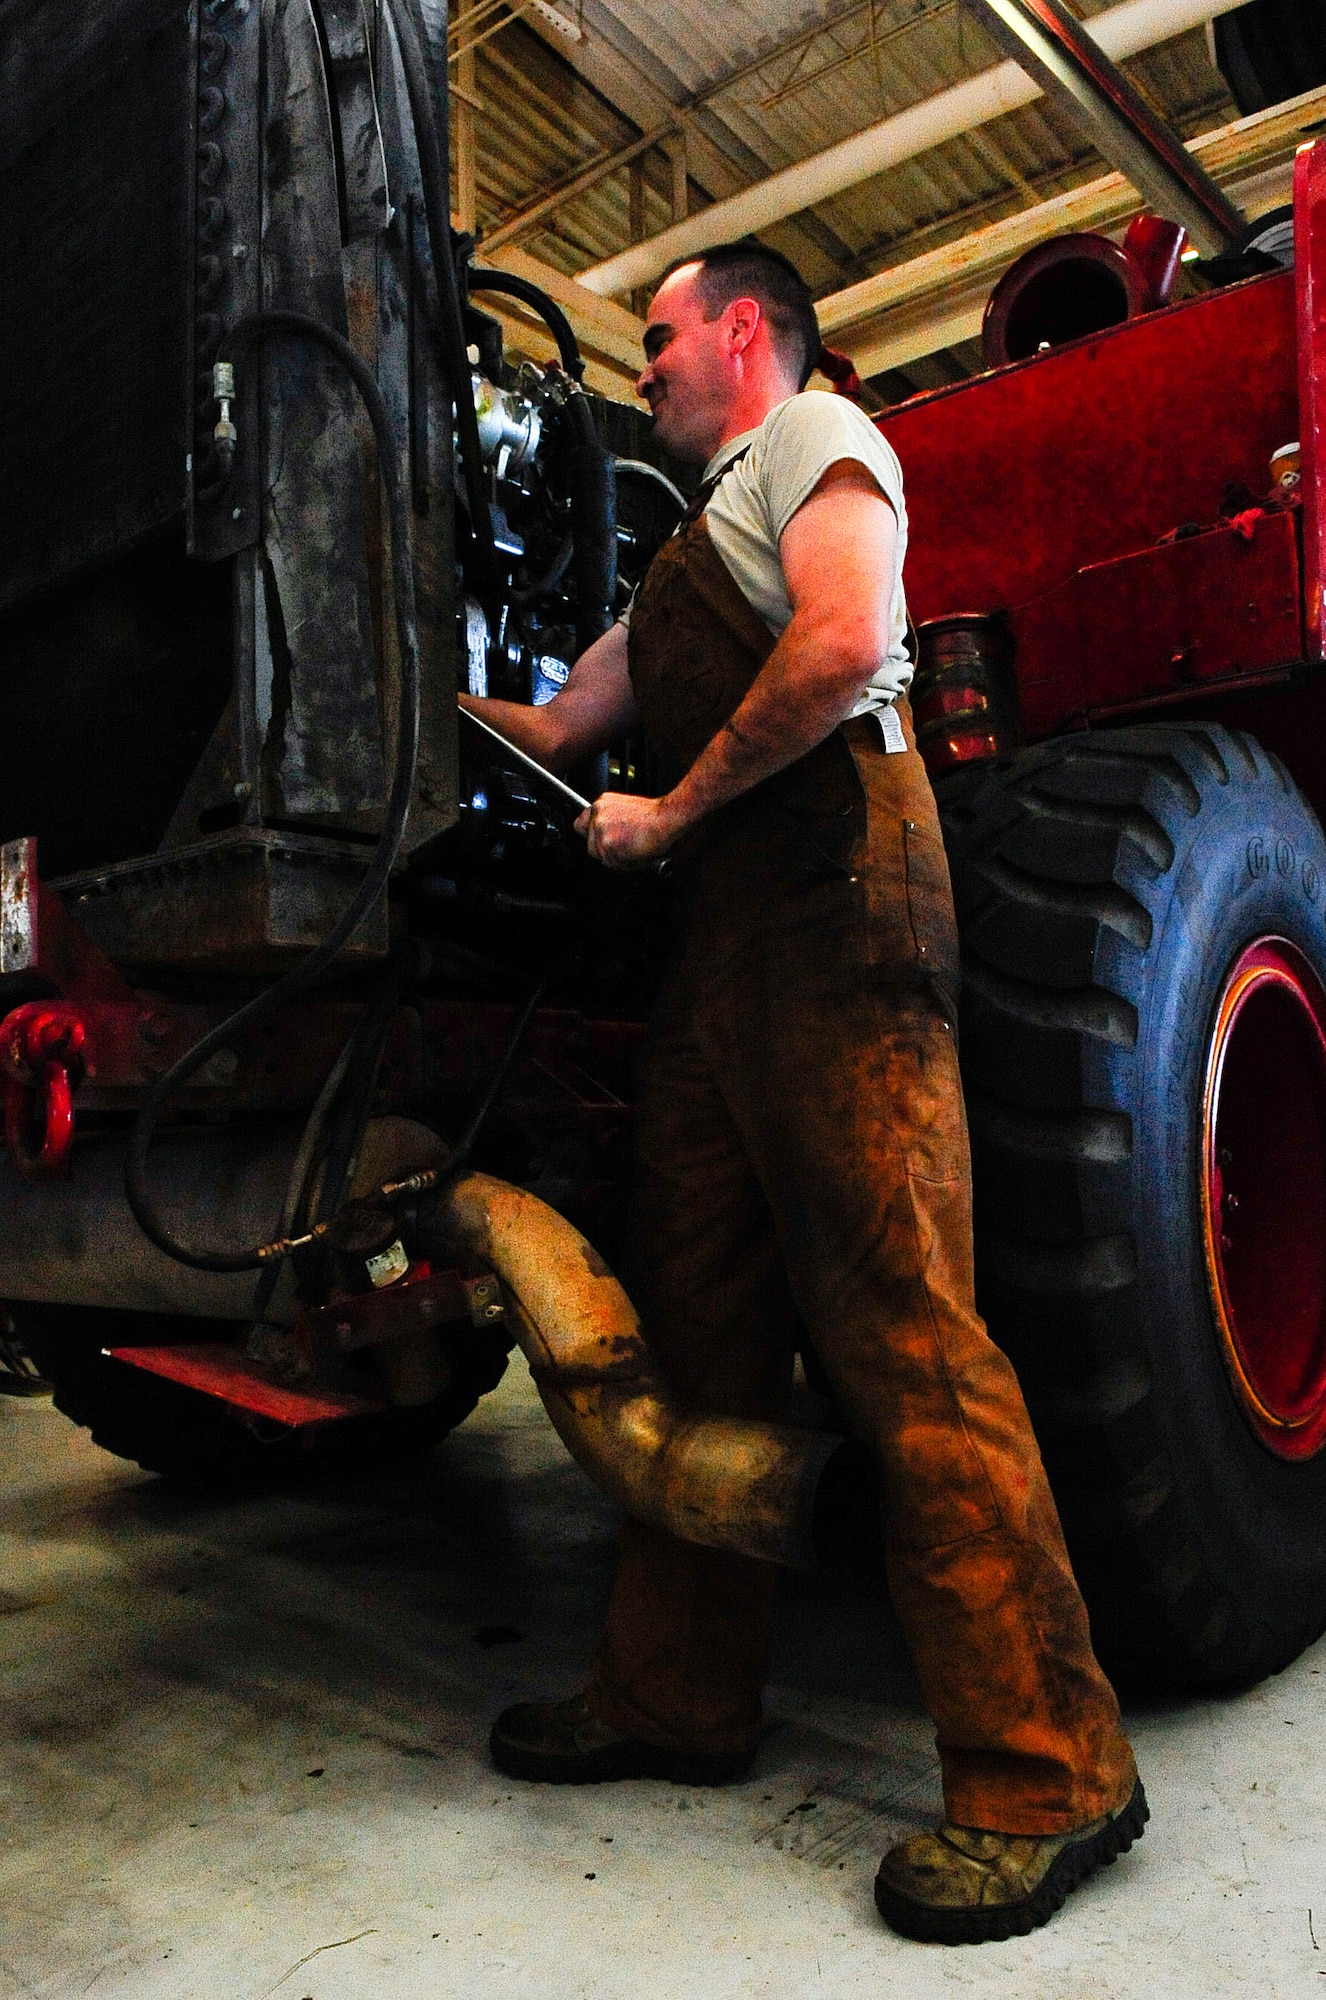 Staff Sgt. Nicholas Cawley, 1st Special Operations Logistics Readiness Squadron vehicle equipment journeyman, works on a fire truck at Hurlburt Filed, Fla., Jan. 21, 2015. The fire truck has been active since 1986, making it the oldest government vehicle on Hurlburt. (U.S. Air Force photo/Airman 1st Class Andrea Posey)